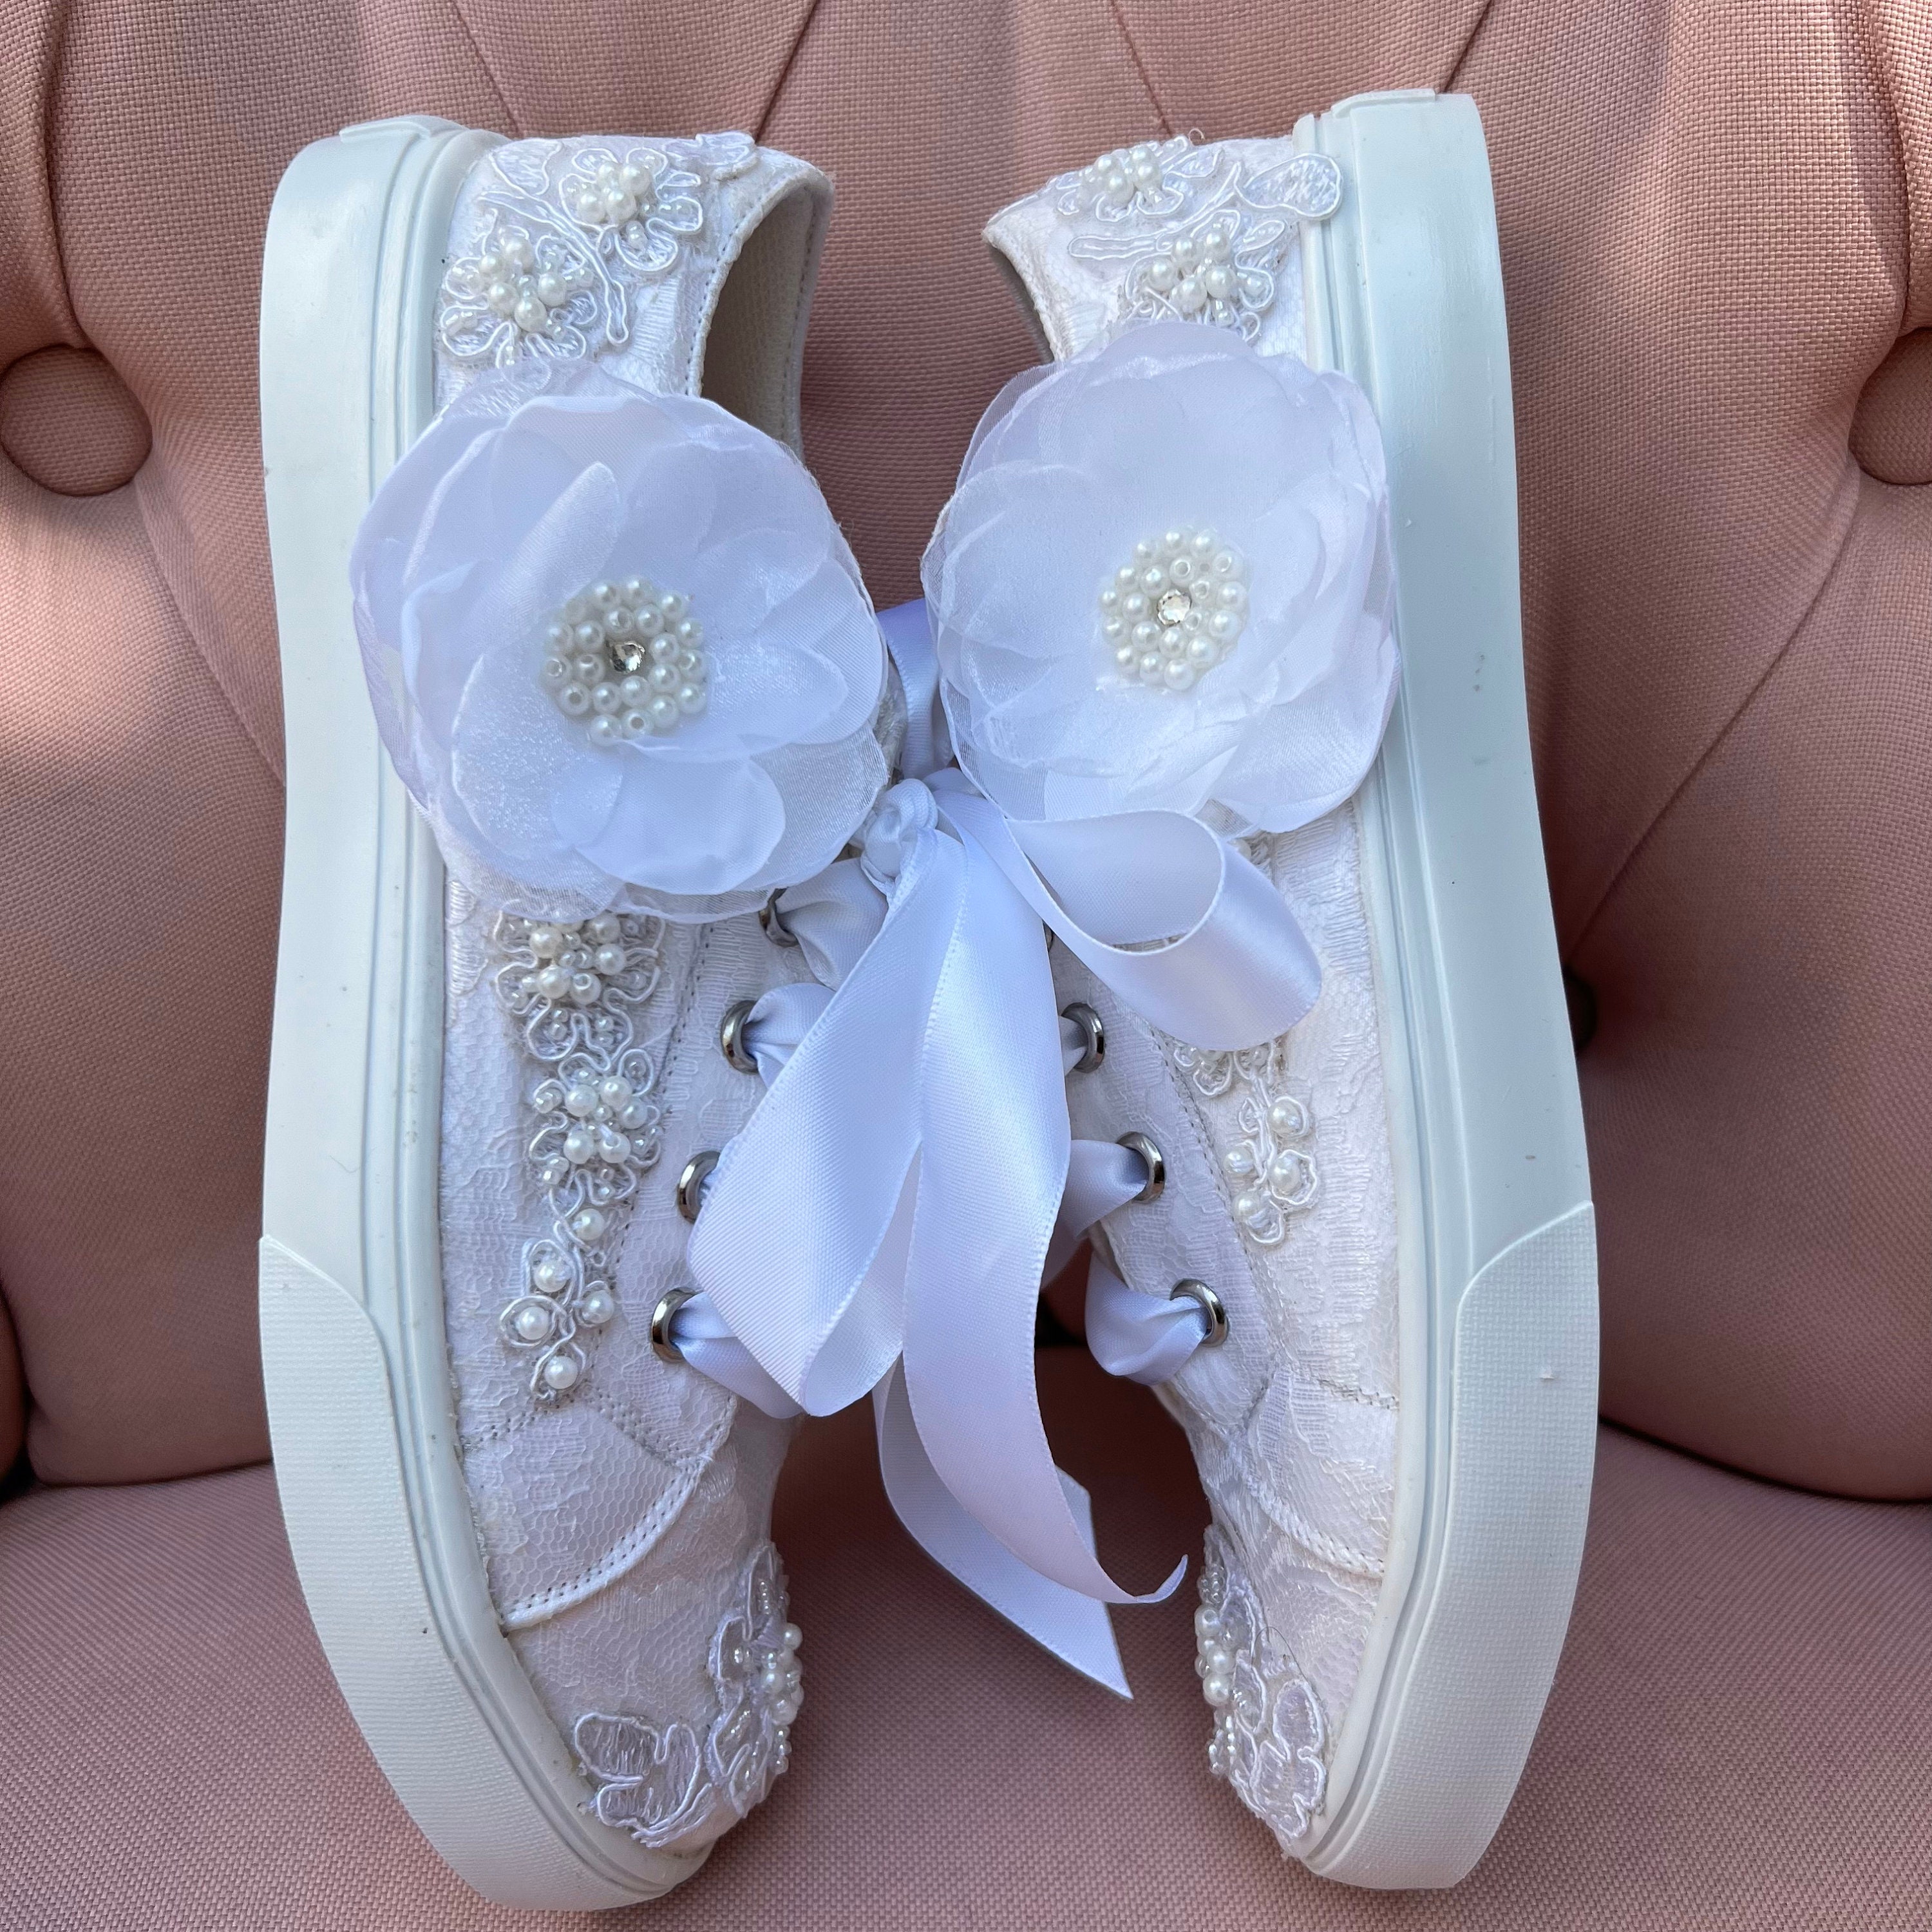 Satin Bow White Baby Girls Canvas Sneakers Tennis Shoes Bling Casual Shoes  Sport Shoes for 1st Birthday Gift